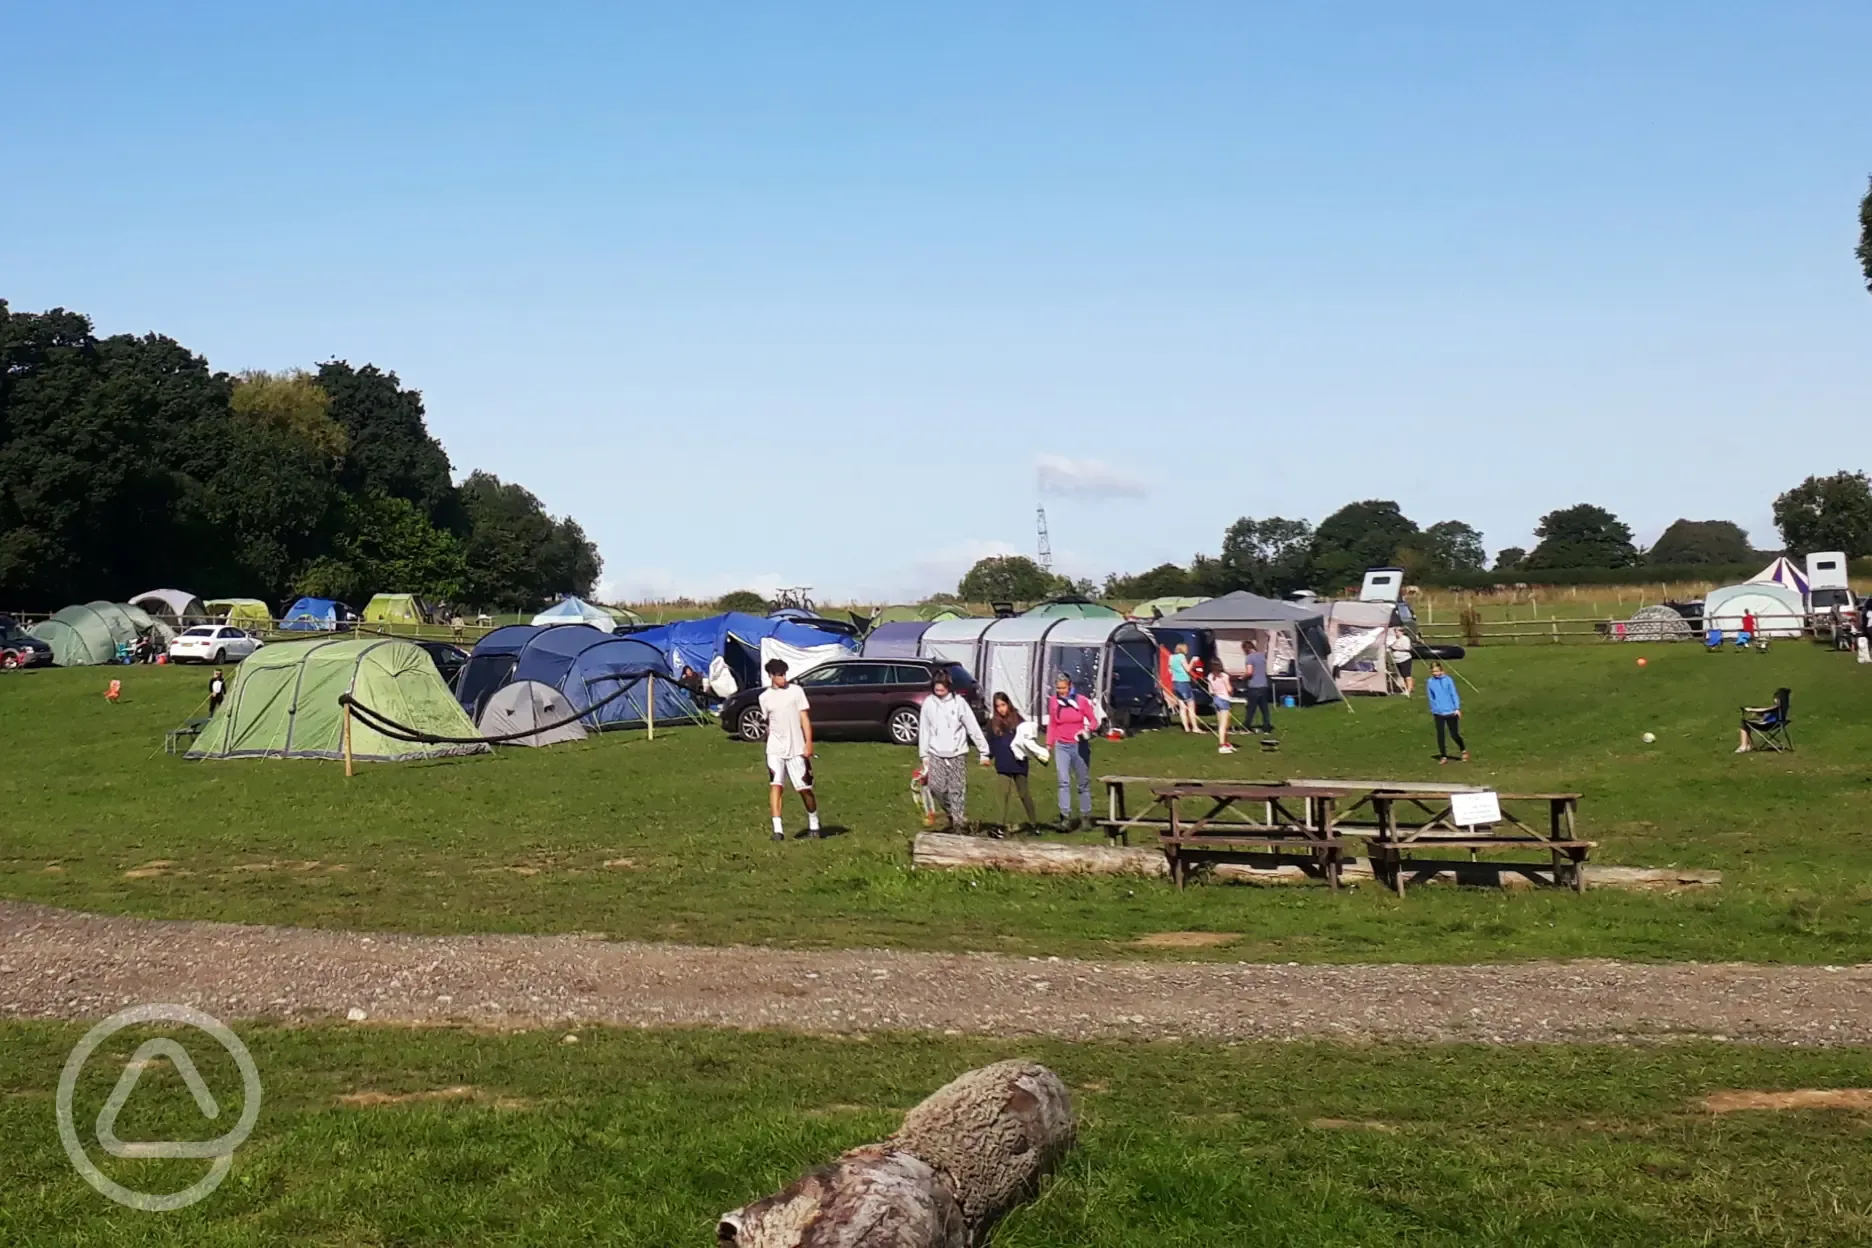 One of the camping fields